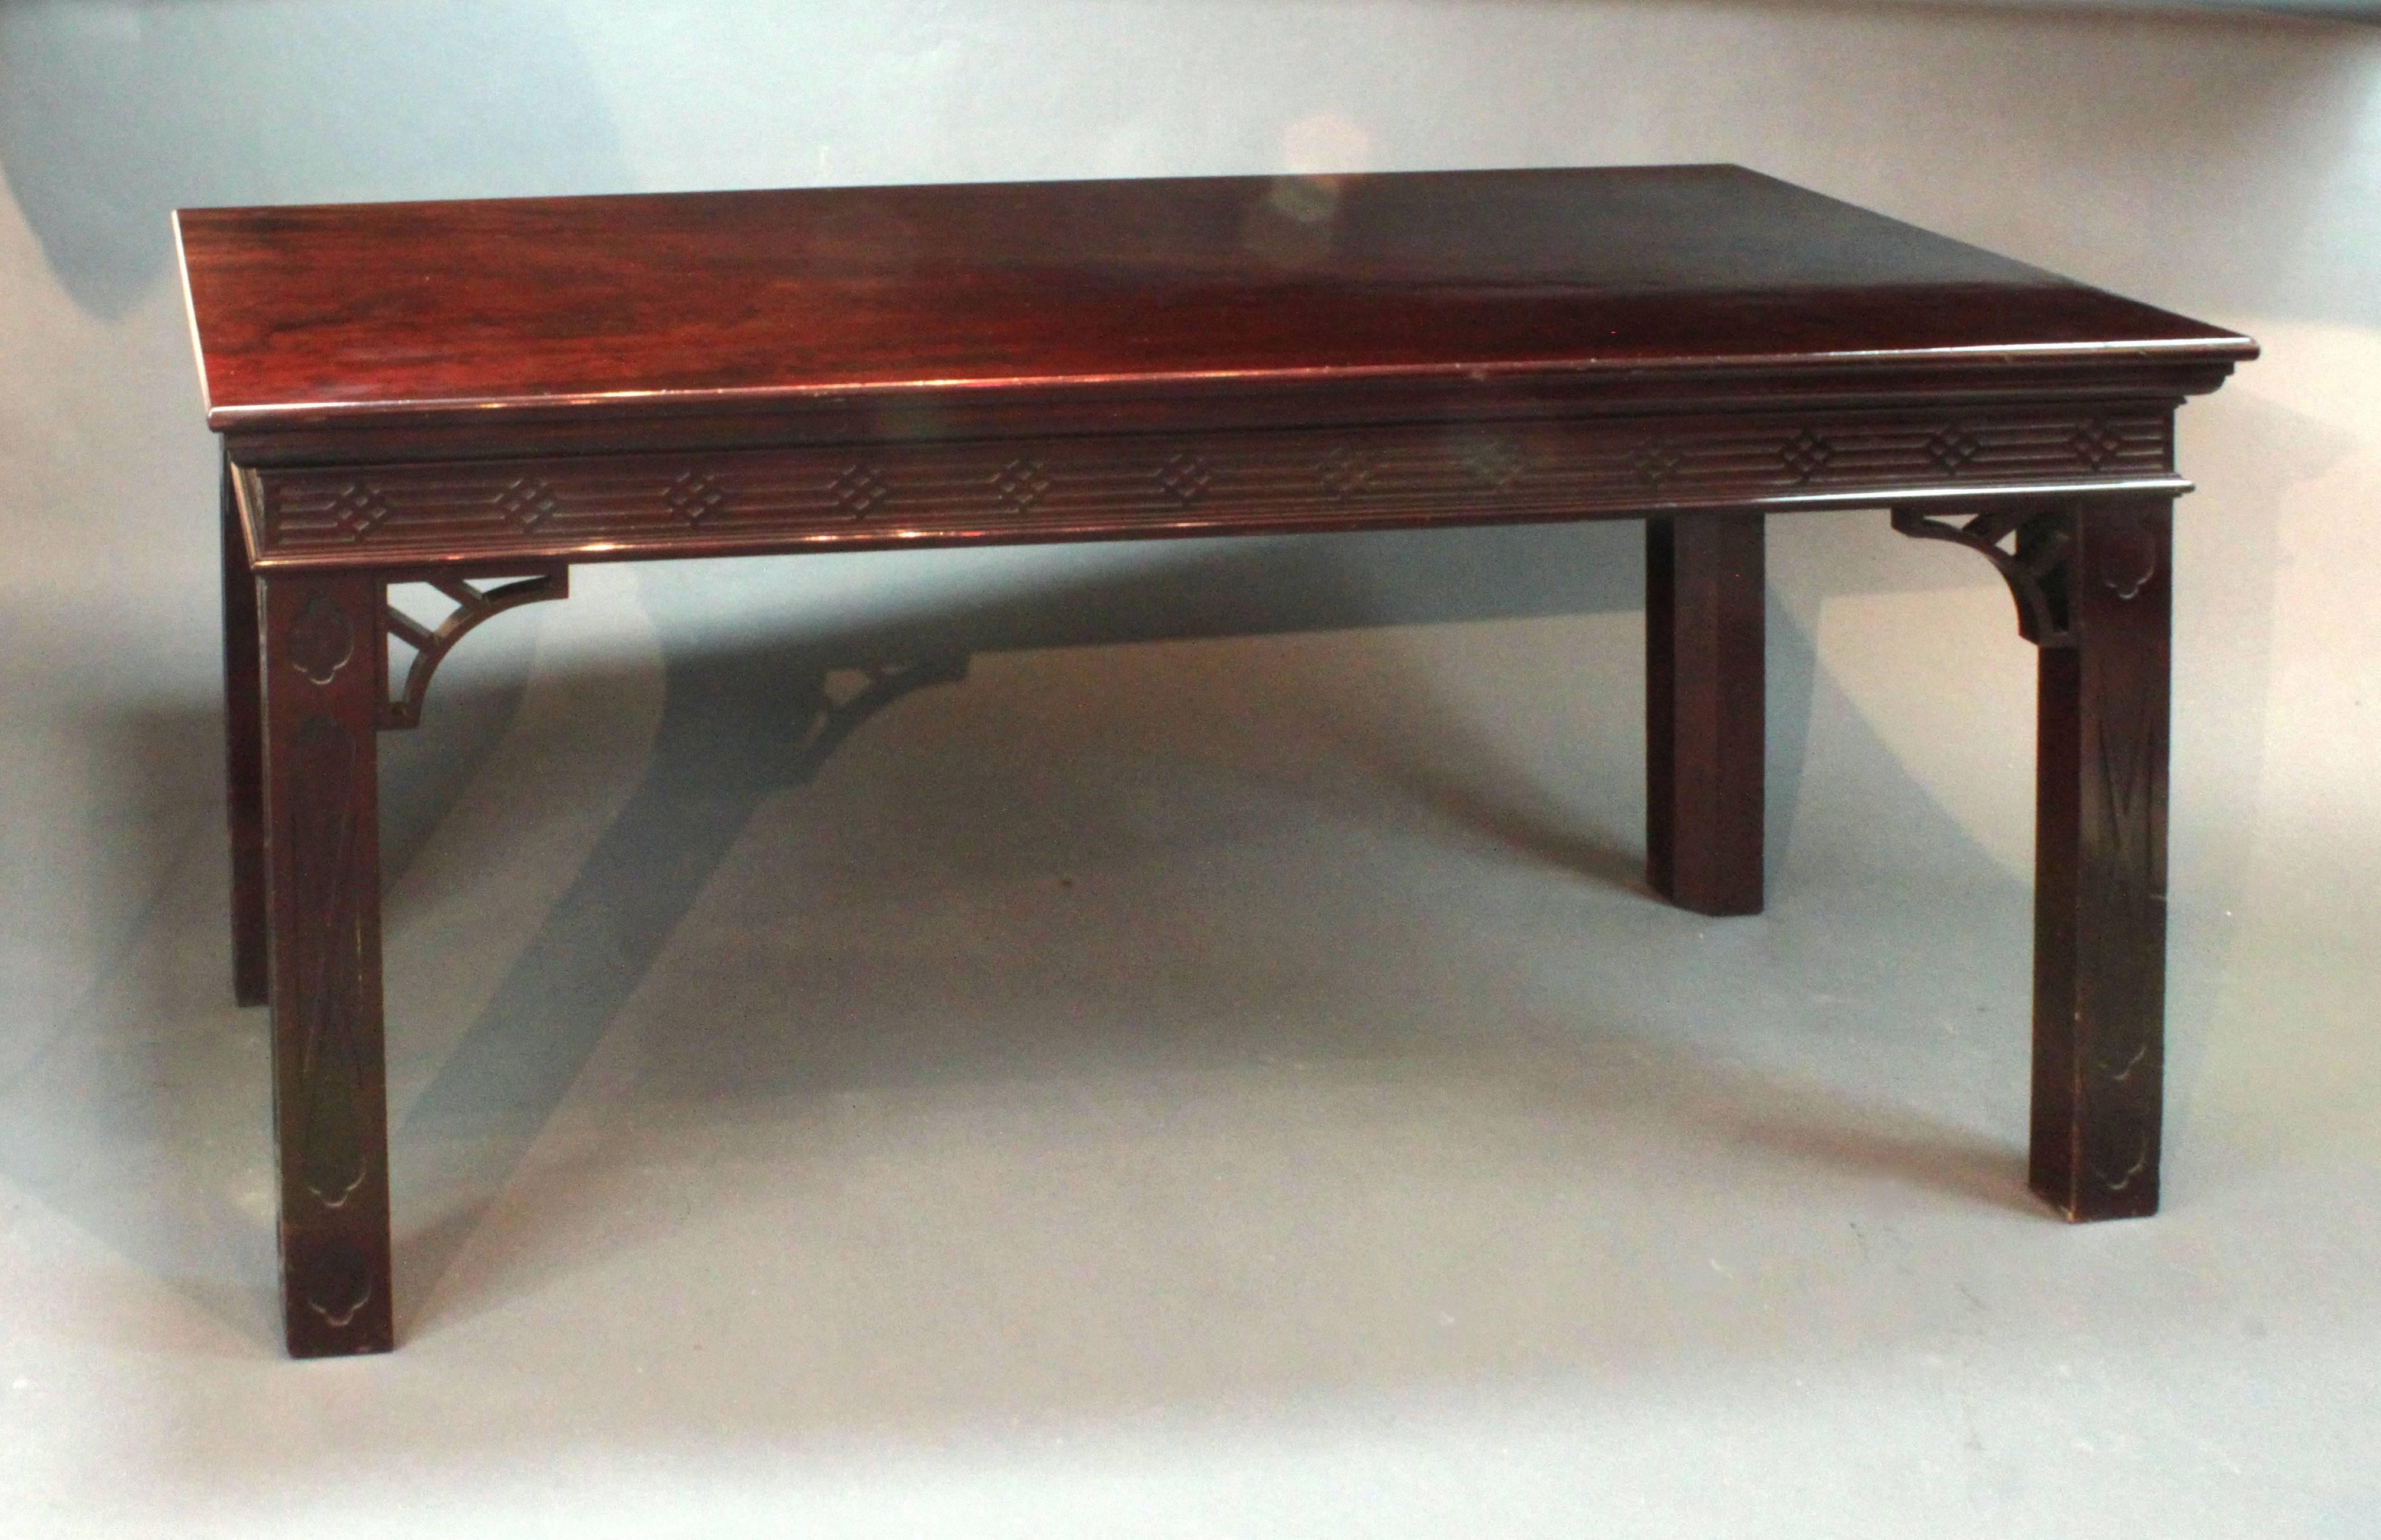 A Chippendale side table/centre table by Butler of Dublin. The top in figured mahogany with solid mahogany legs and frieze; finished on all four sides with applied blind fret to the frieze and legs and with the original pierced brackets. Irish